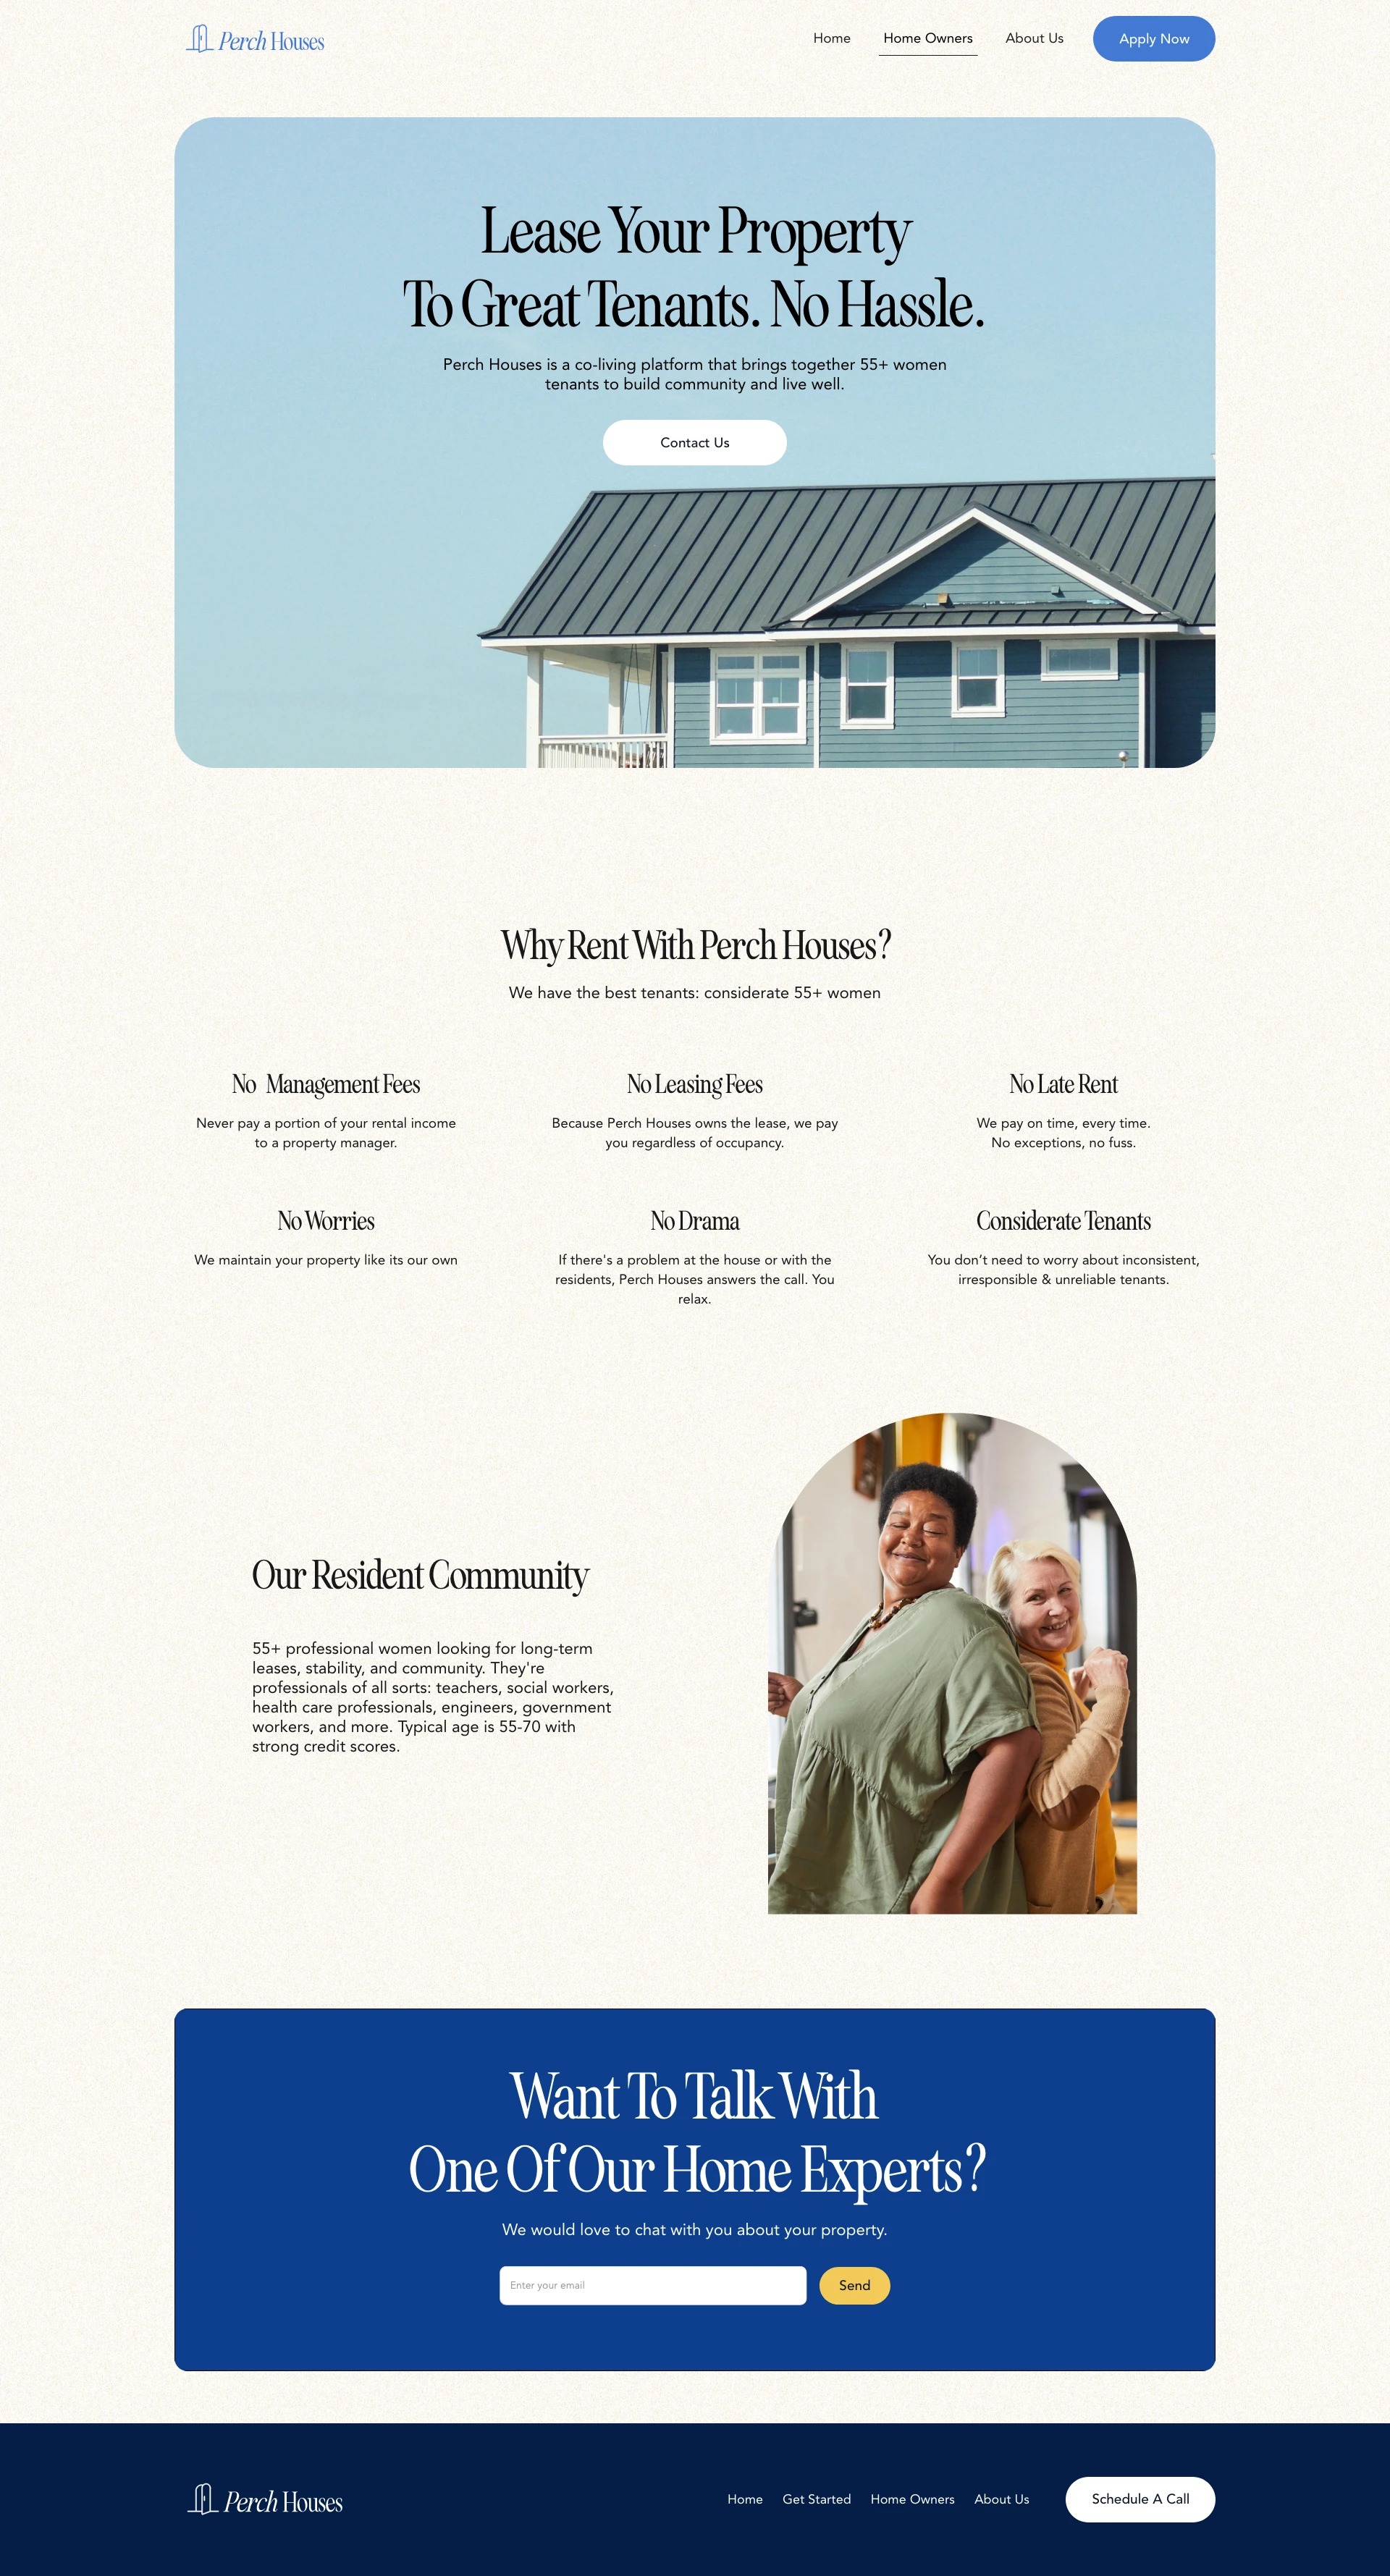 Perch Houses Landing Page Example: Perch Houses brings together women 55+ to co-live in affordable, spacious, beautifully designed houses for the best times of their lives.